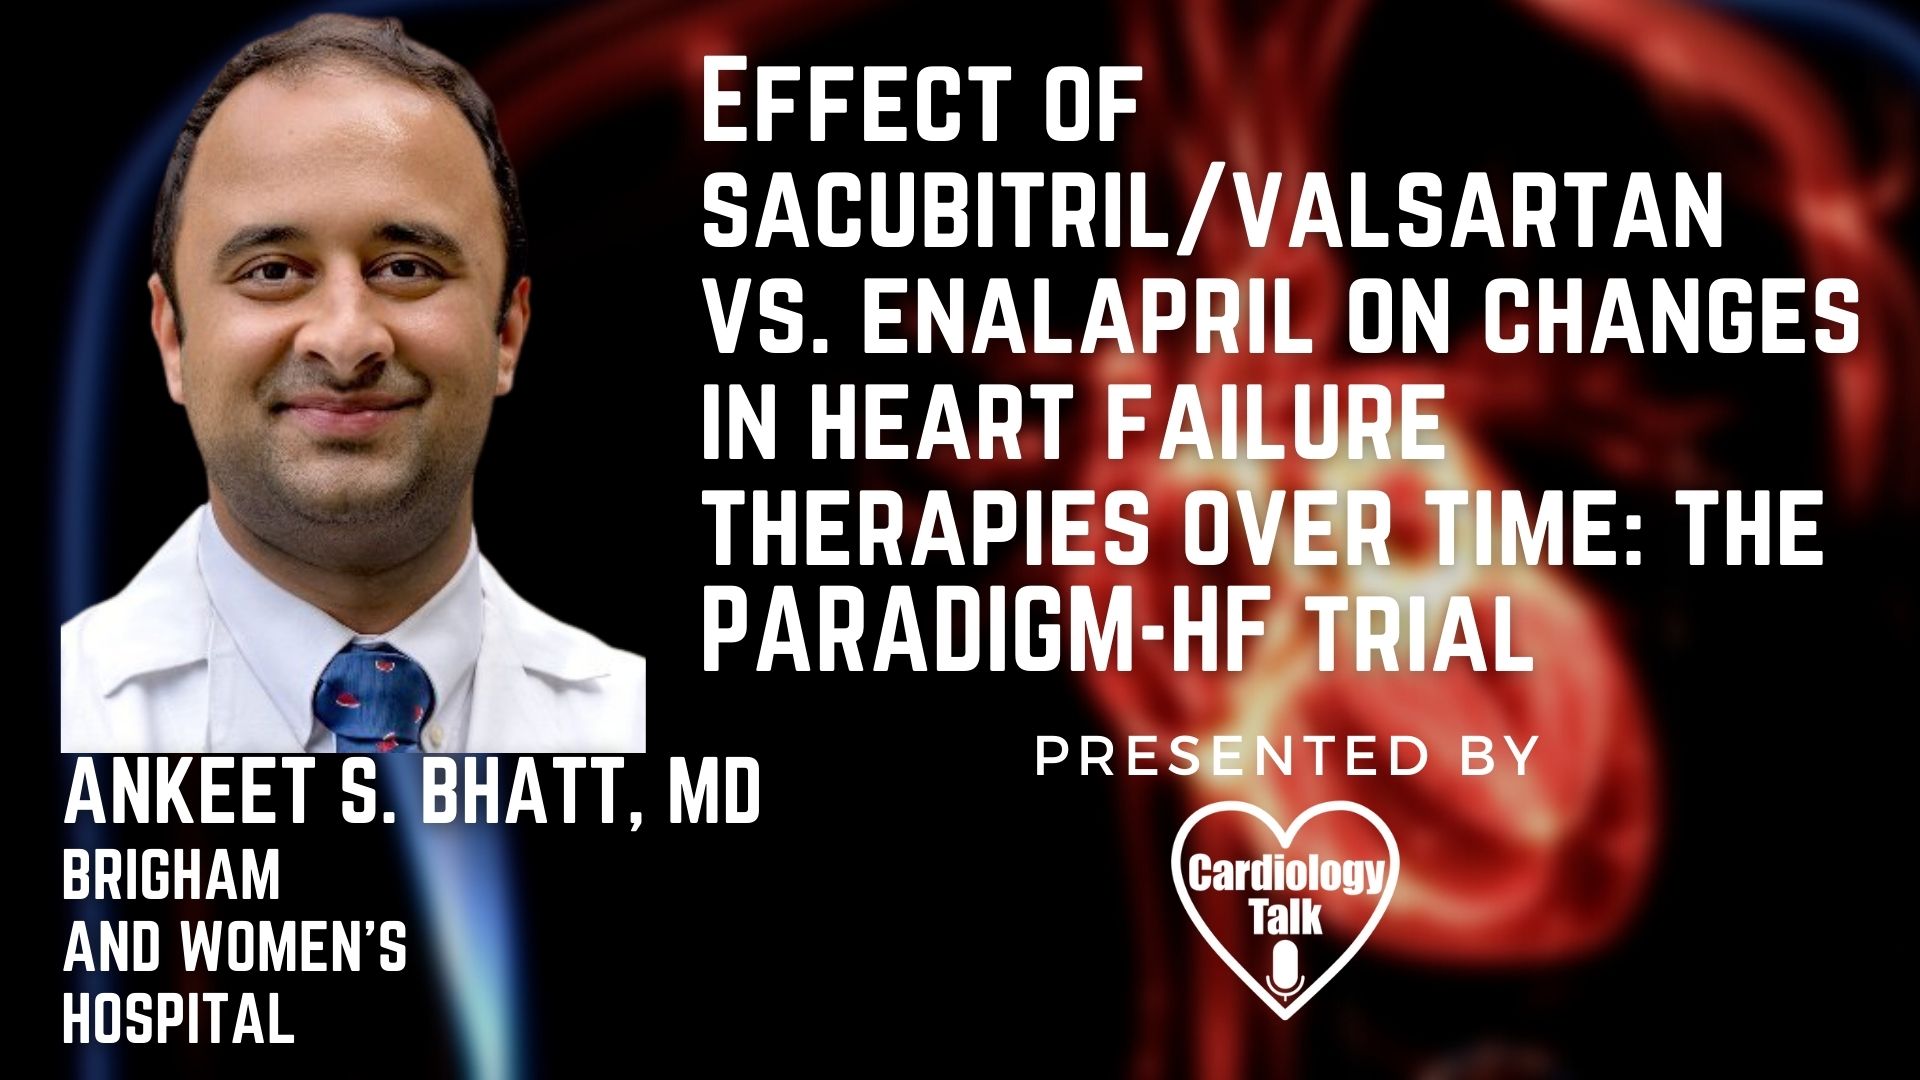 Ankeet S. Bhatt, MD @BrighamCVFellows @mvaduganathan  @UoGHeartFailure #HeartFailure #Cardiology #Research Changes In Heart Failure Therapies Over Time: The PARADIGM-HF Trial